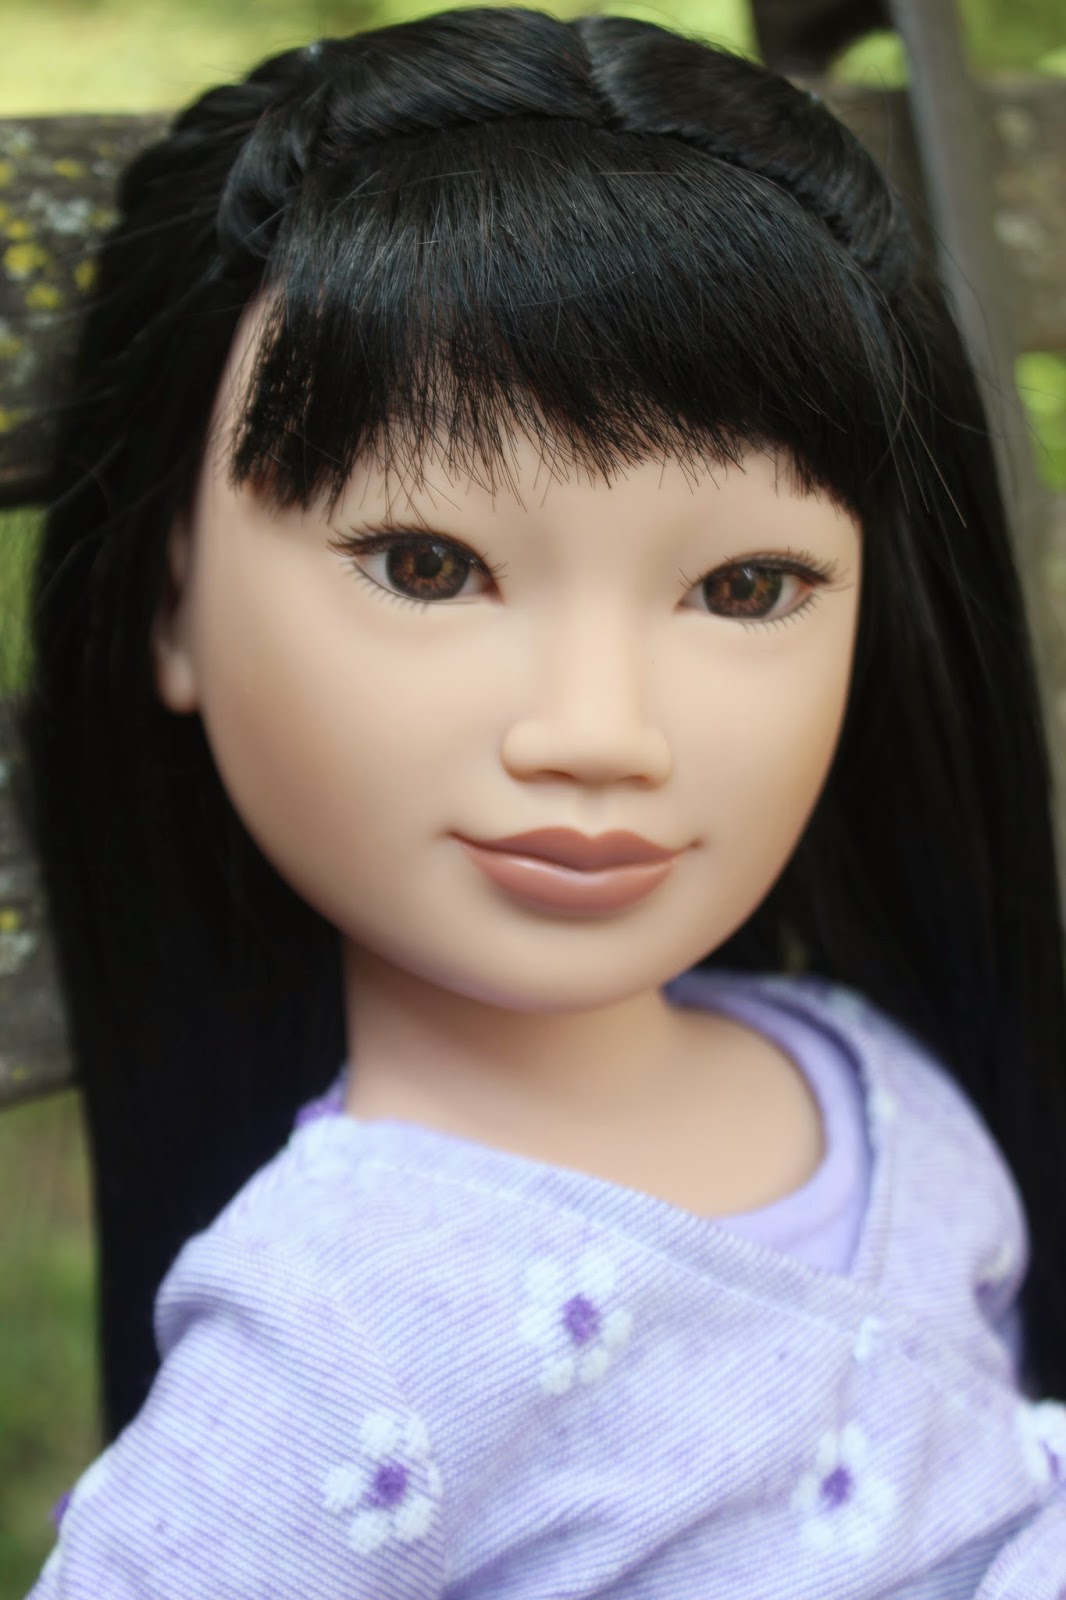 PLANET OF THE DOLLS: Doll-A-Day 221: Karito Kids Wan Ling